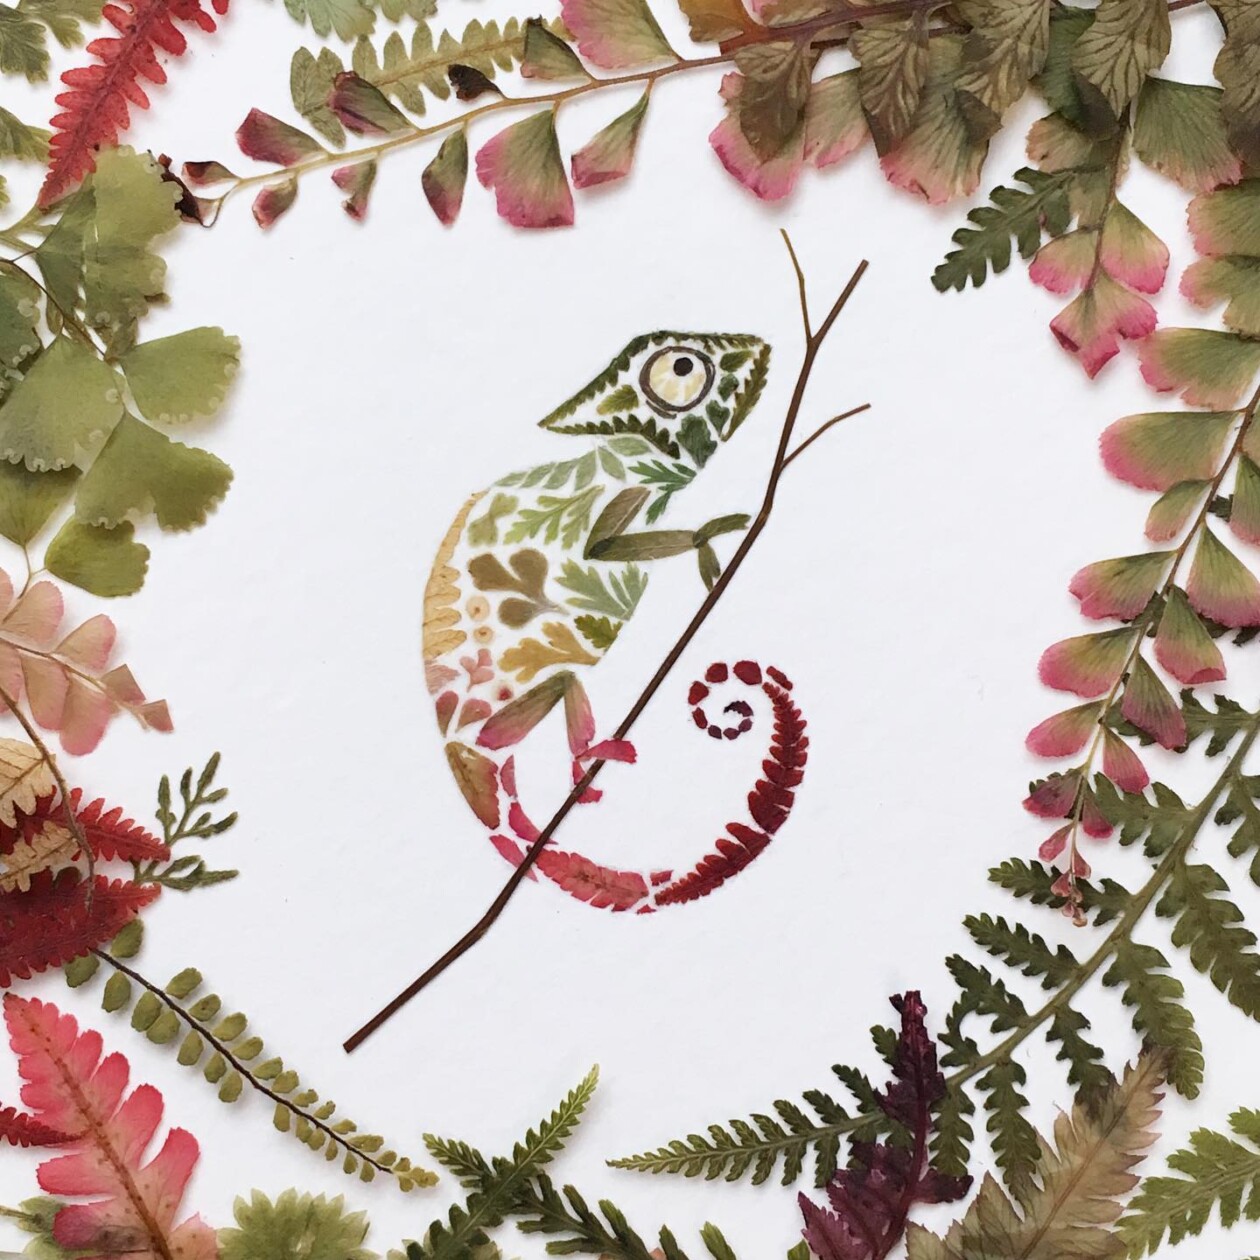 Illustrations Made Of Pressed Leaves And Flowers By Helen Ahpornsiri (5)